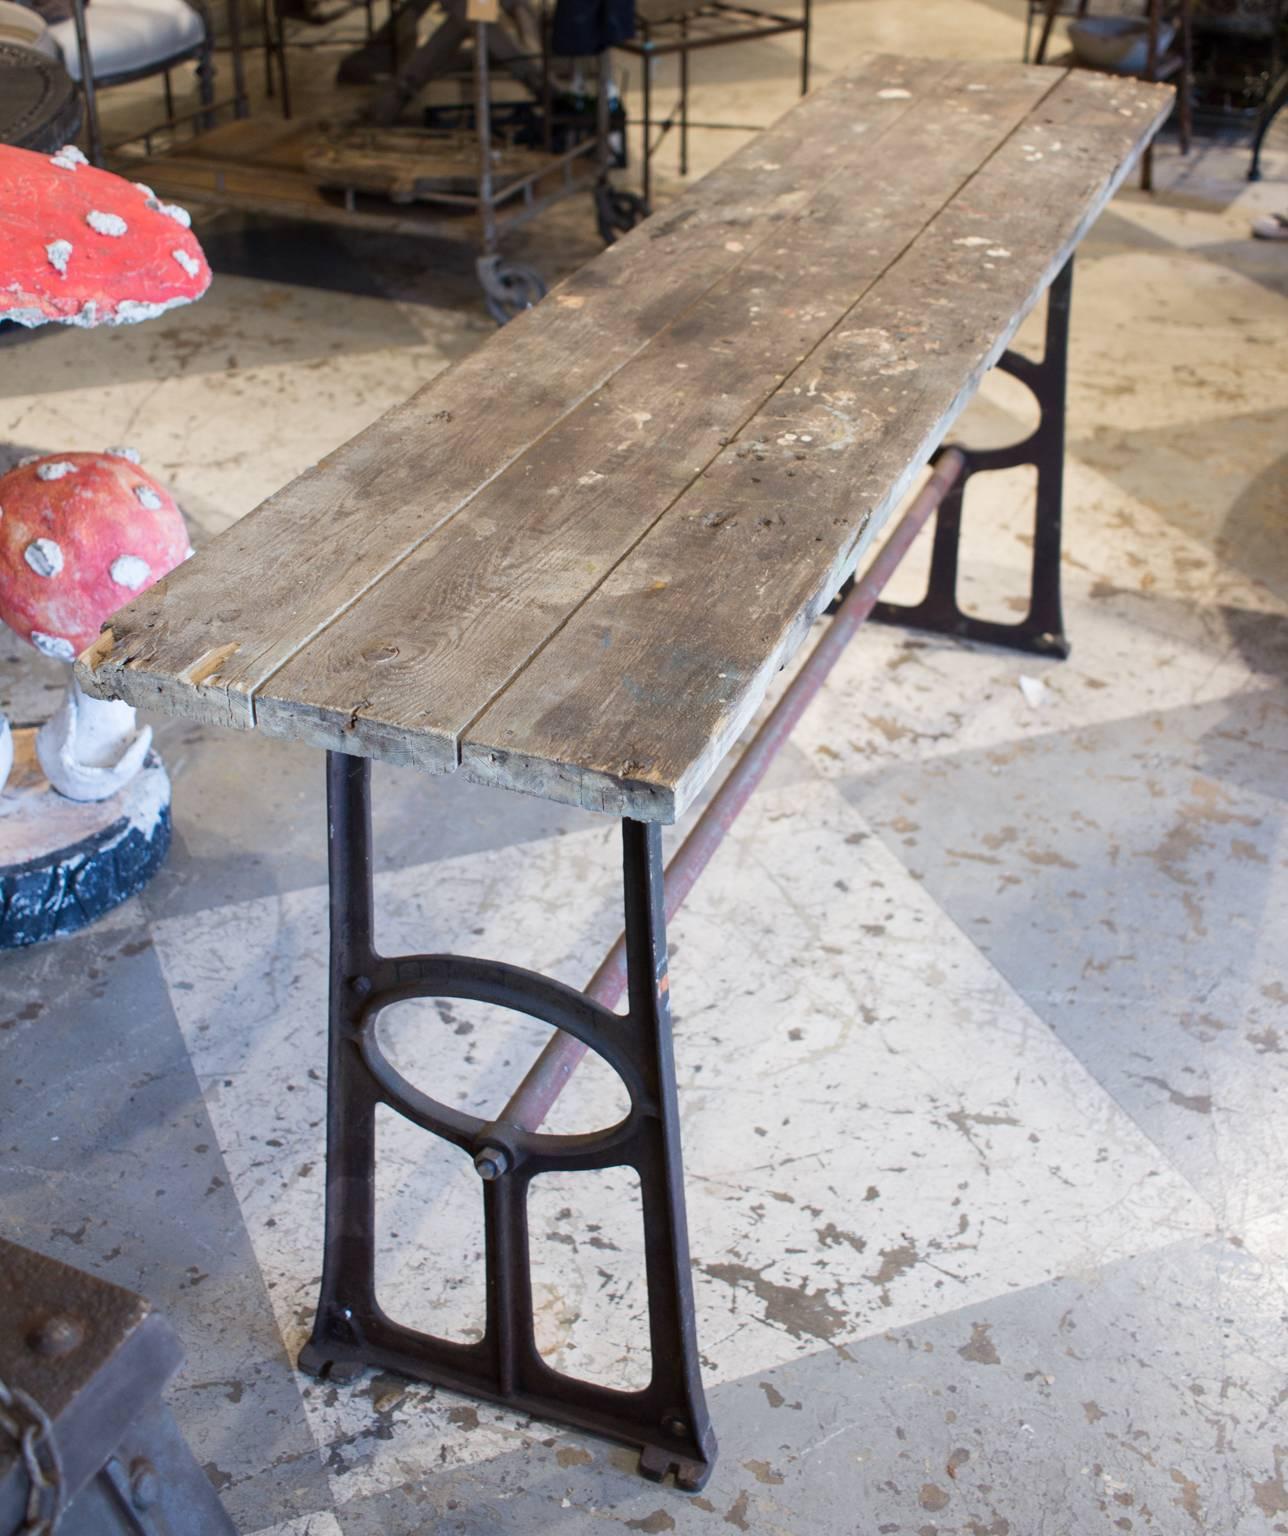 This is a rustic console table we found on our most recent buying trip to France. The top is wood and the base is iron. The base has some reddish toned paint along with an aged patina. The Industrial look of this piece lends itself well for use as a